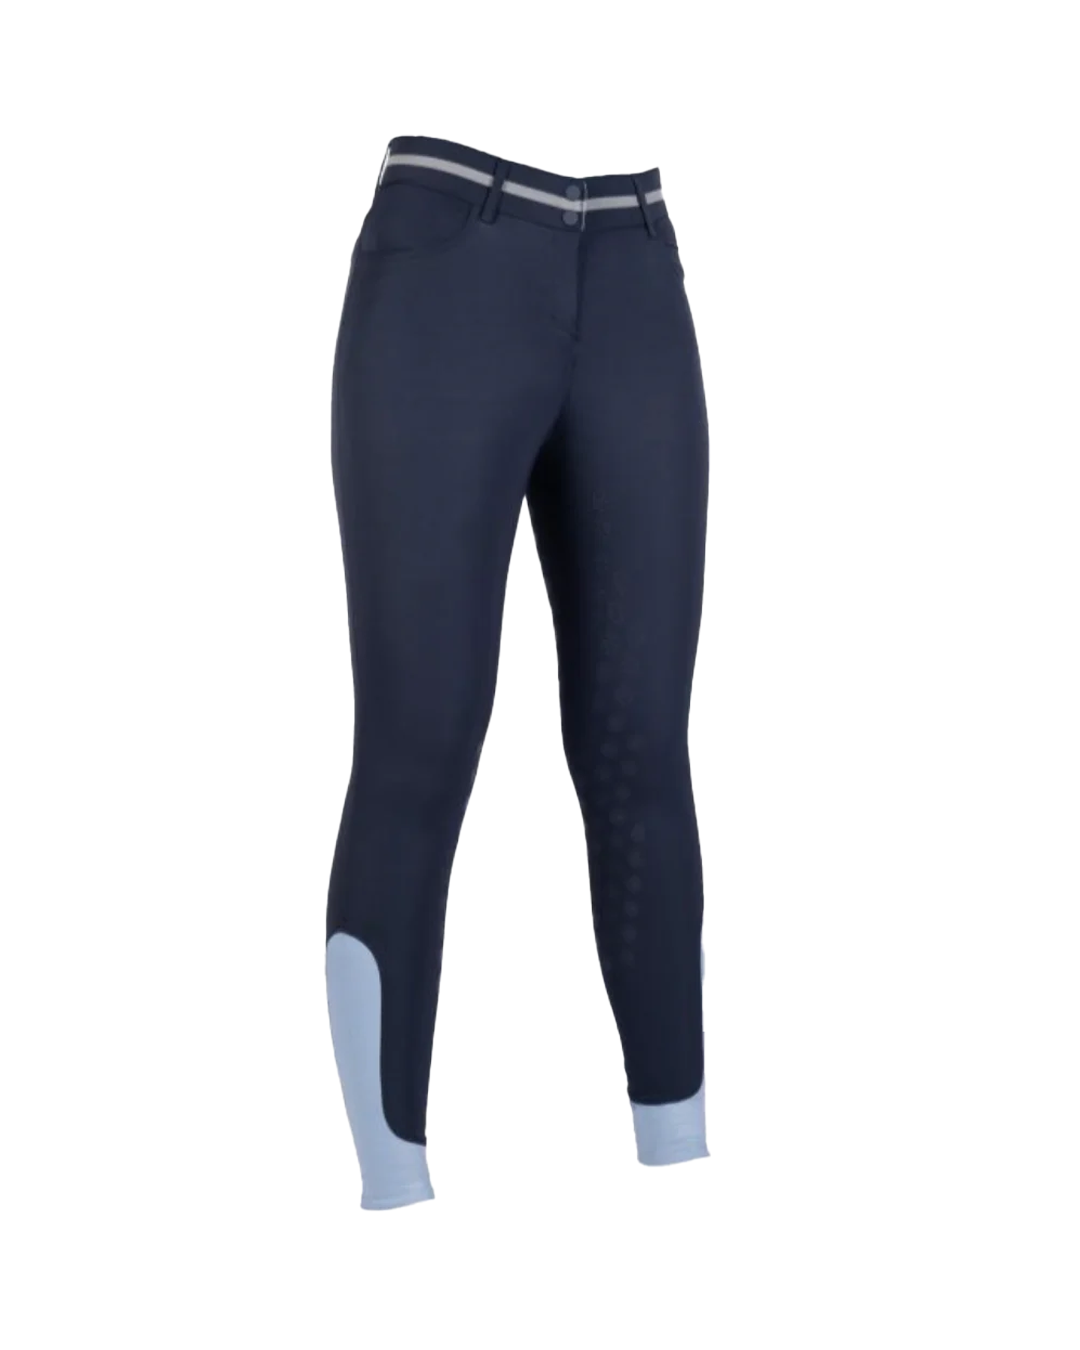 HKM Bloomsbury Breeches Breeches HKM - Equestrian Fashion Outfitters